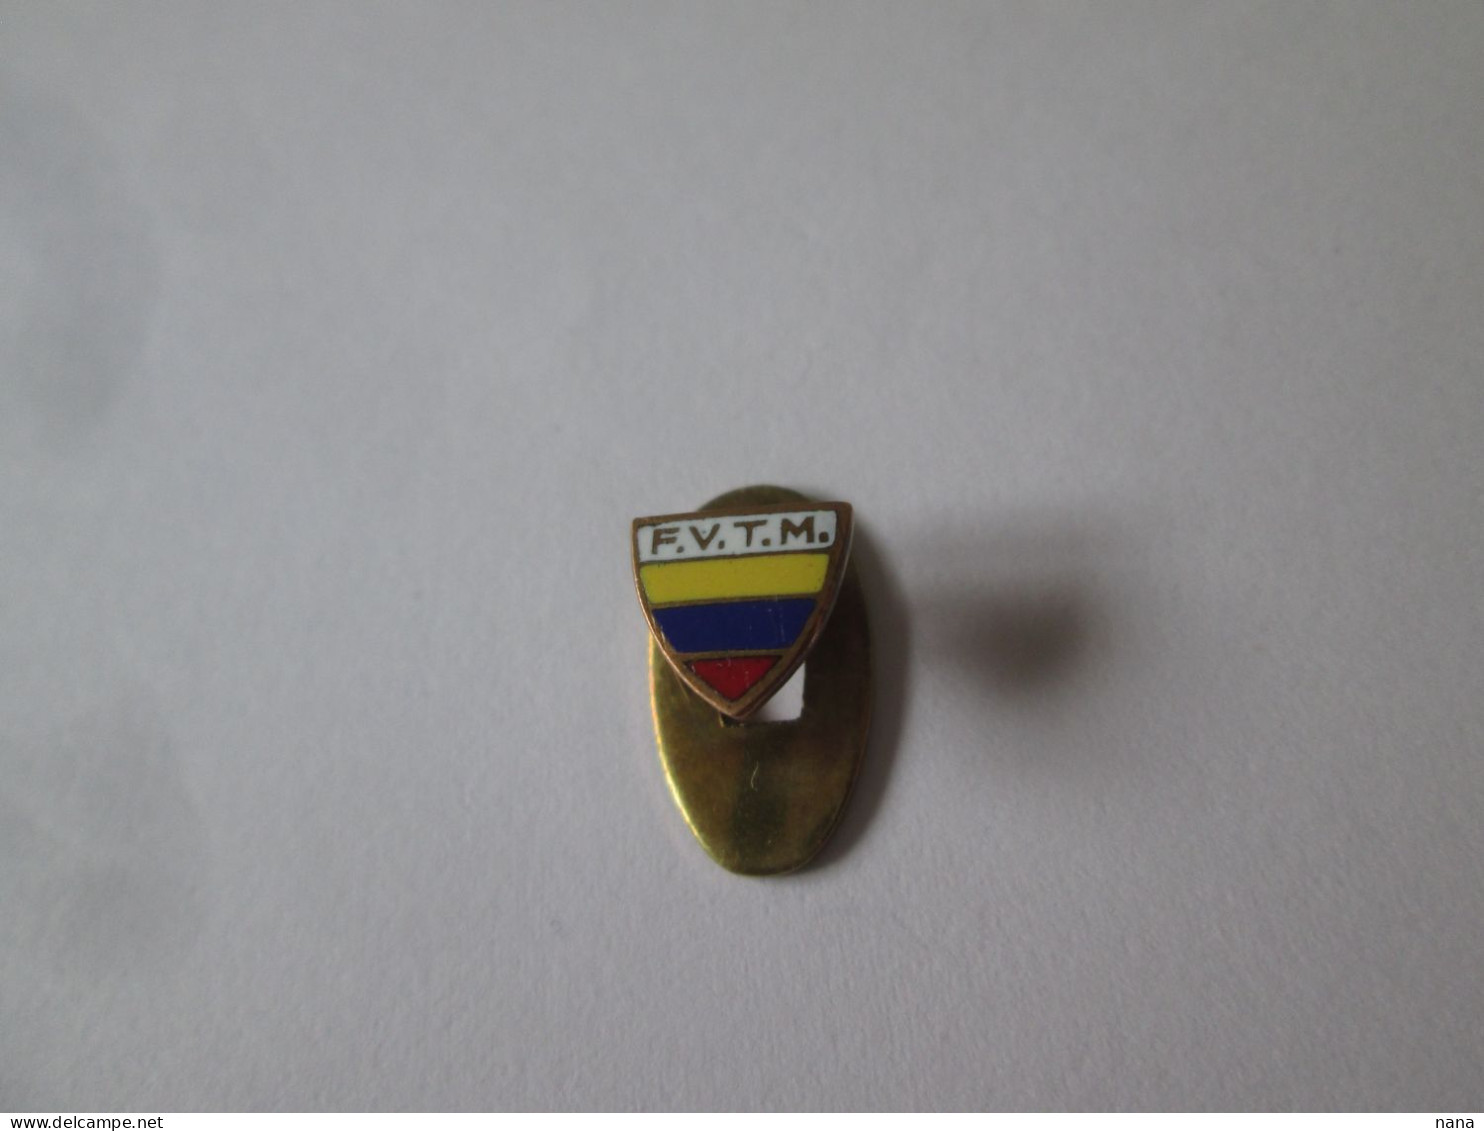 Rare! Venezuela Old Badge Of The Table Tennis Federation From The 50s - Tenis De Mesa